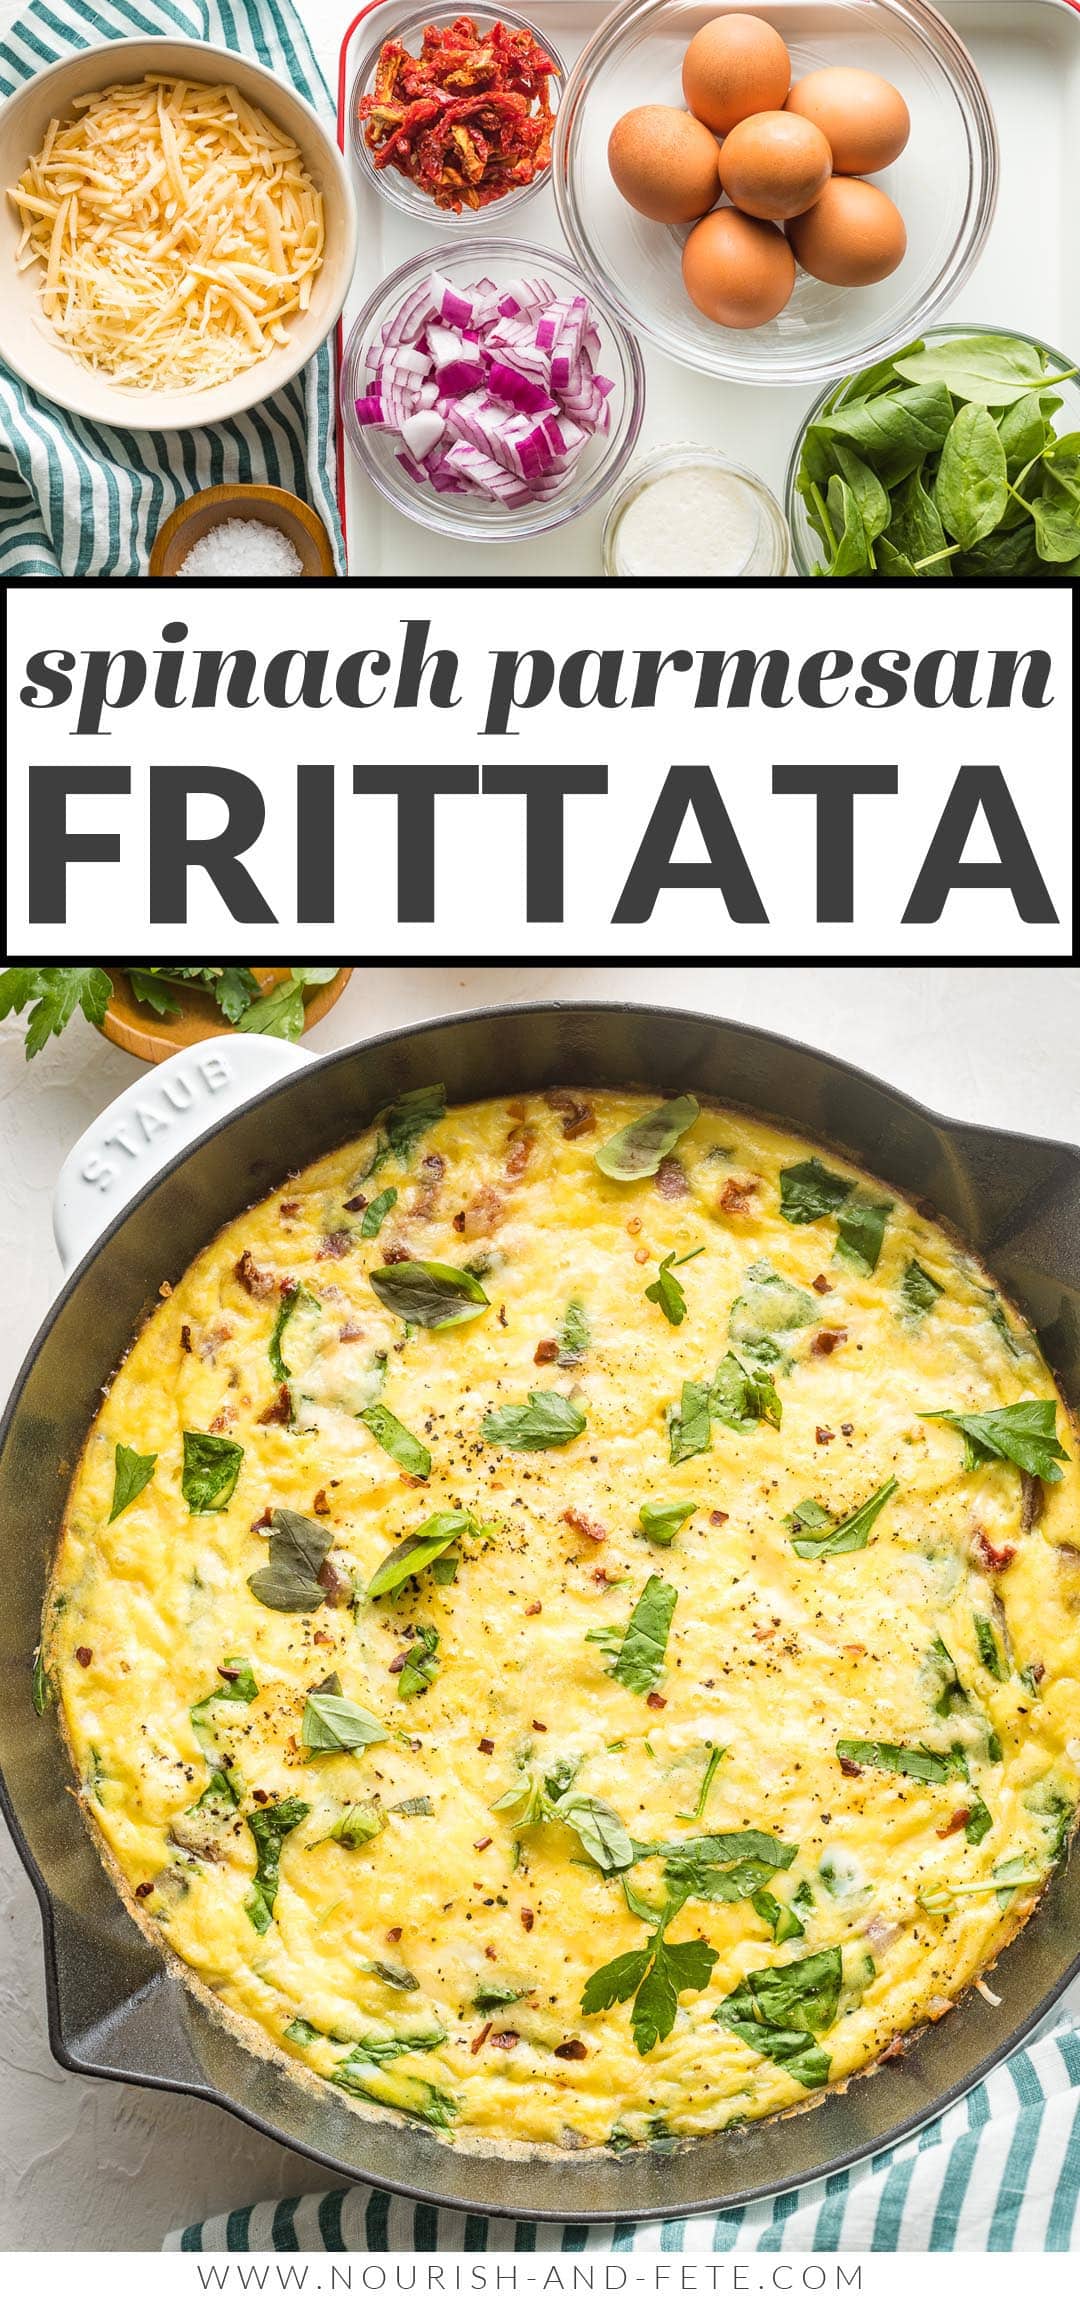 Spinach Parmesan Frittata - Best for Brunch or Dinner! - Nourish and Fete